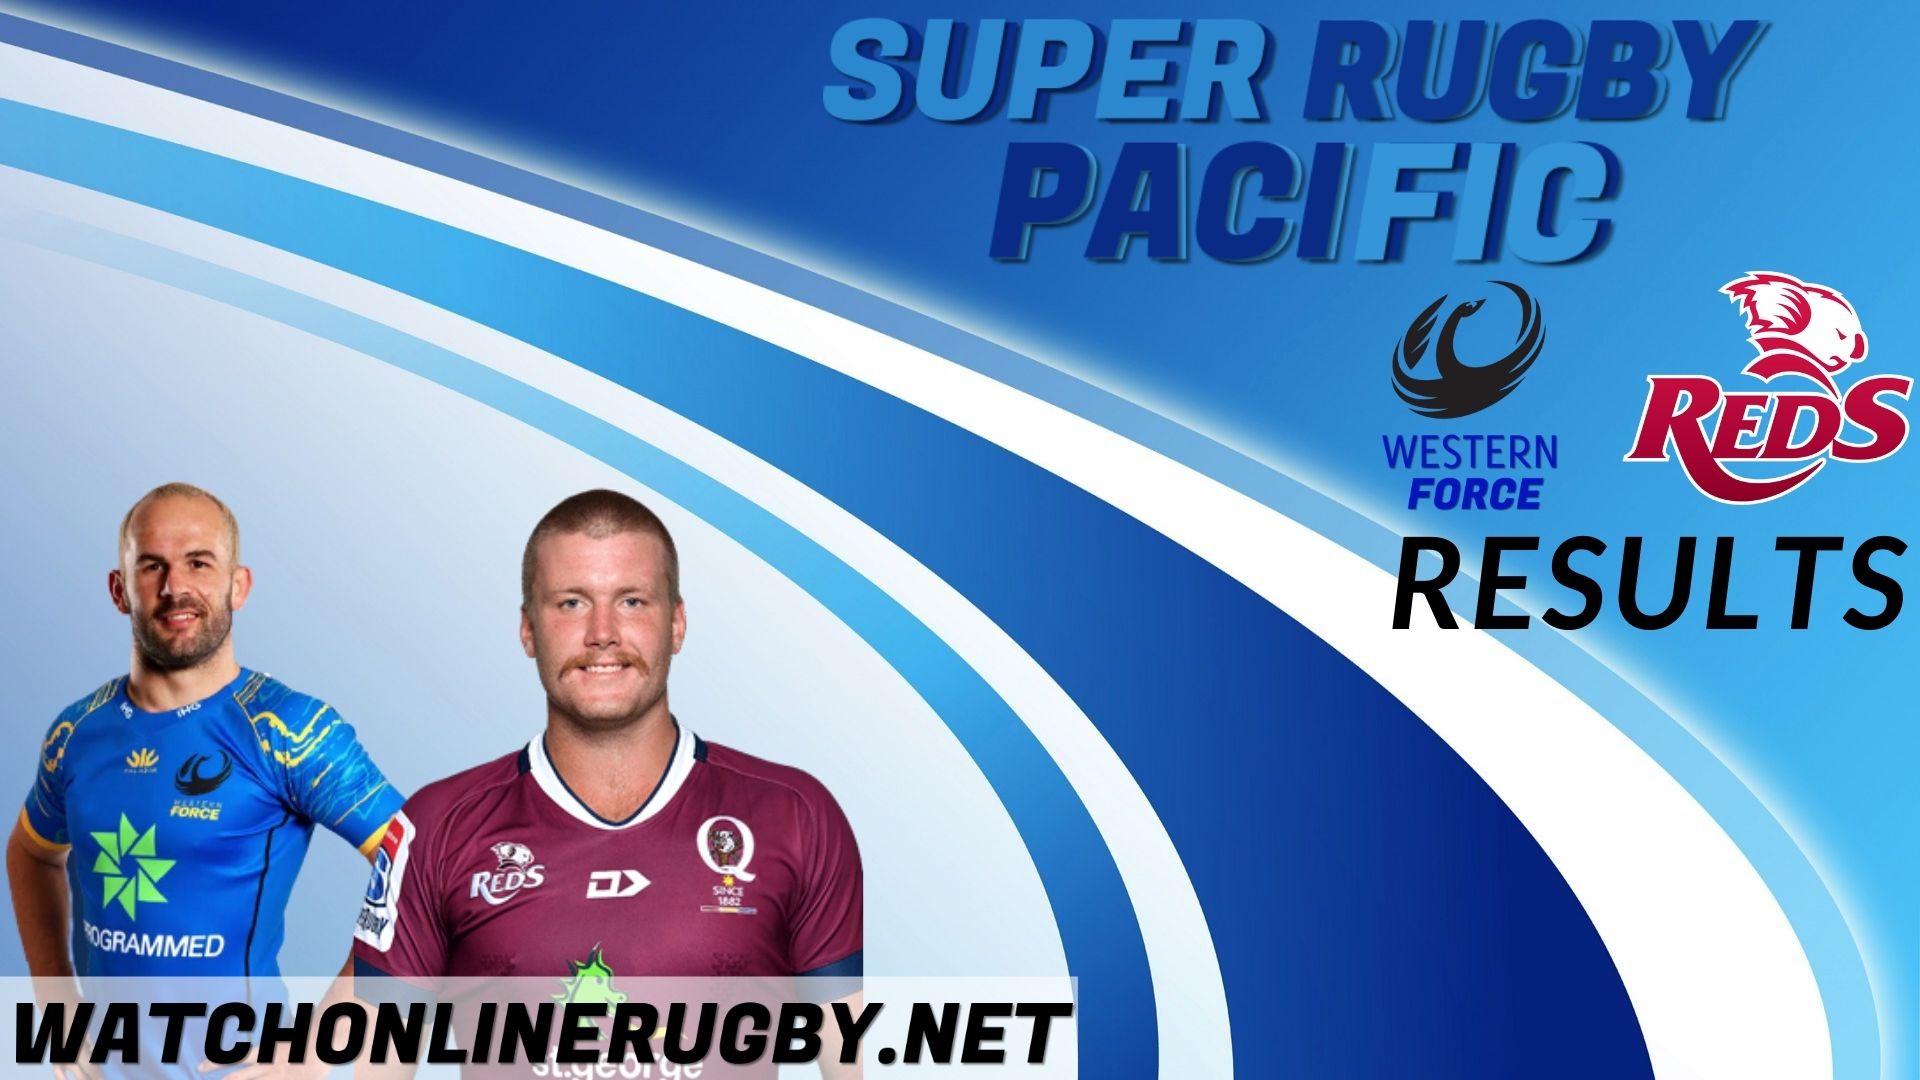 Western Force Vs Reds Super Rugby Pacific 2022 RD 3